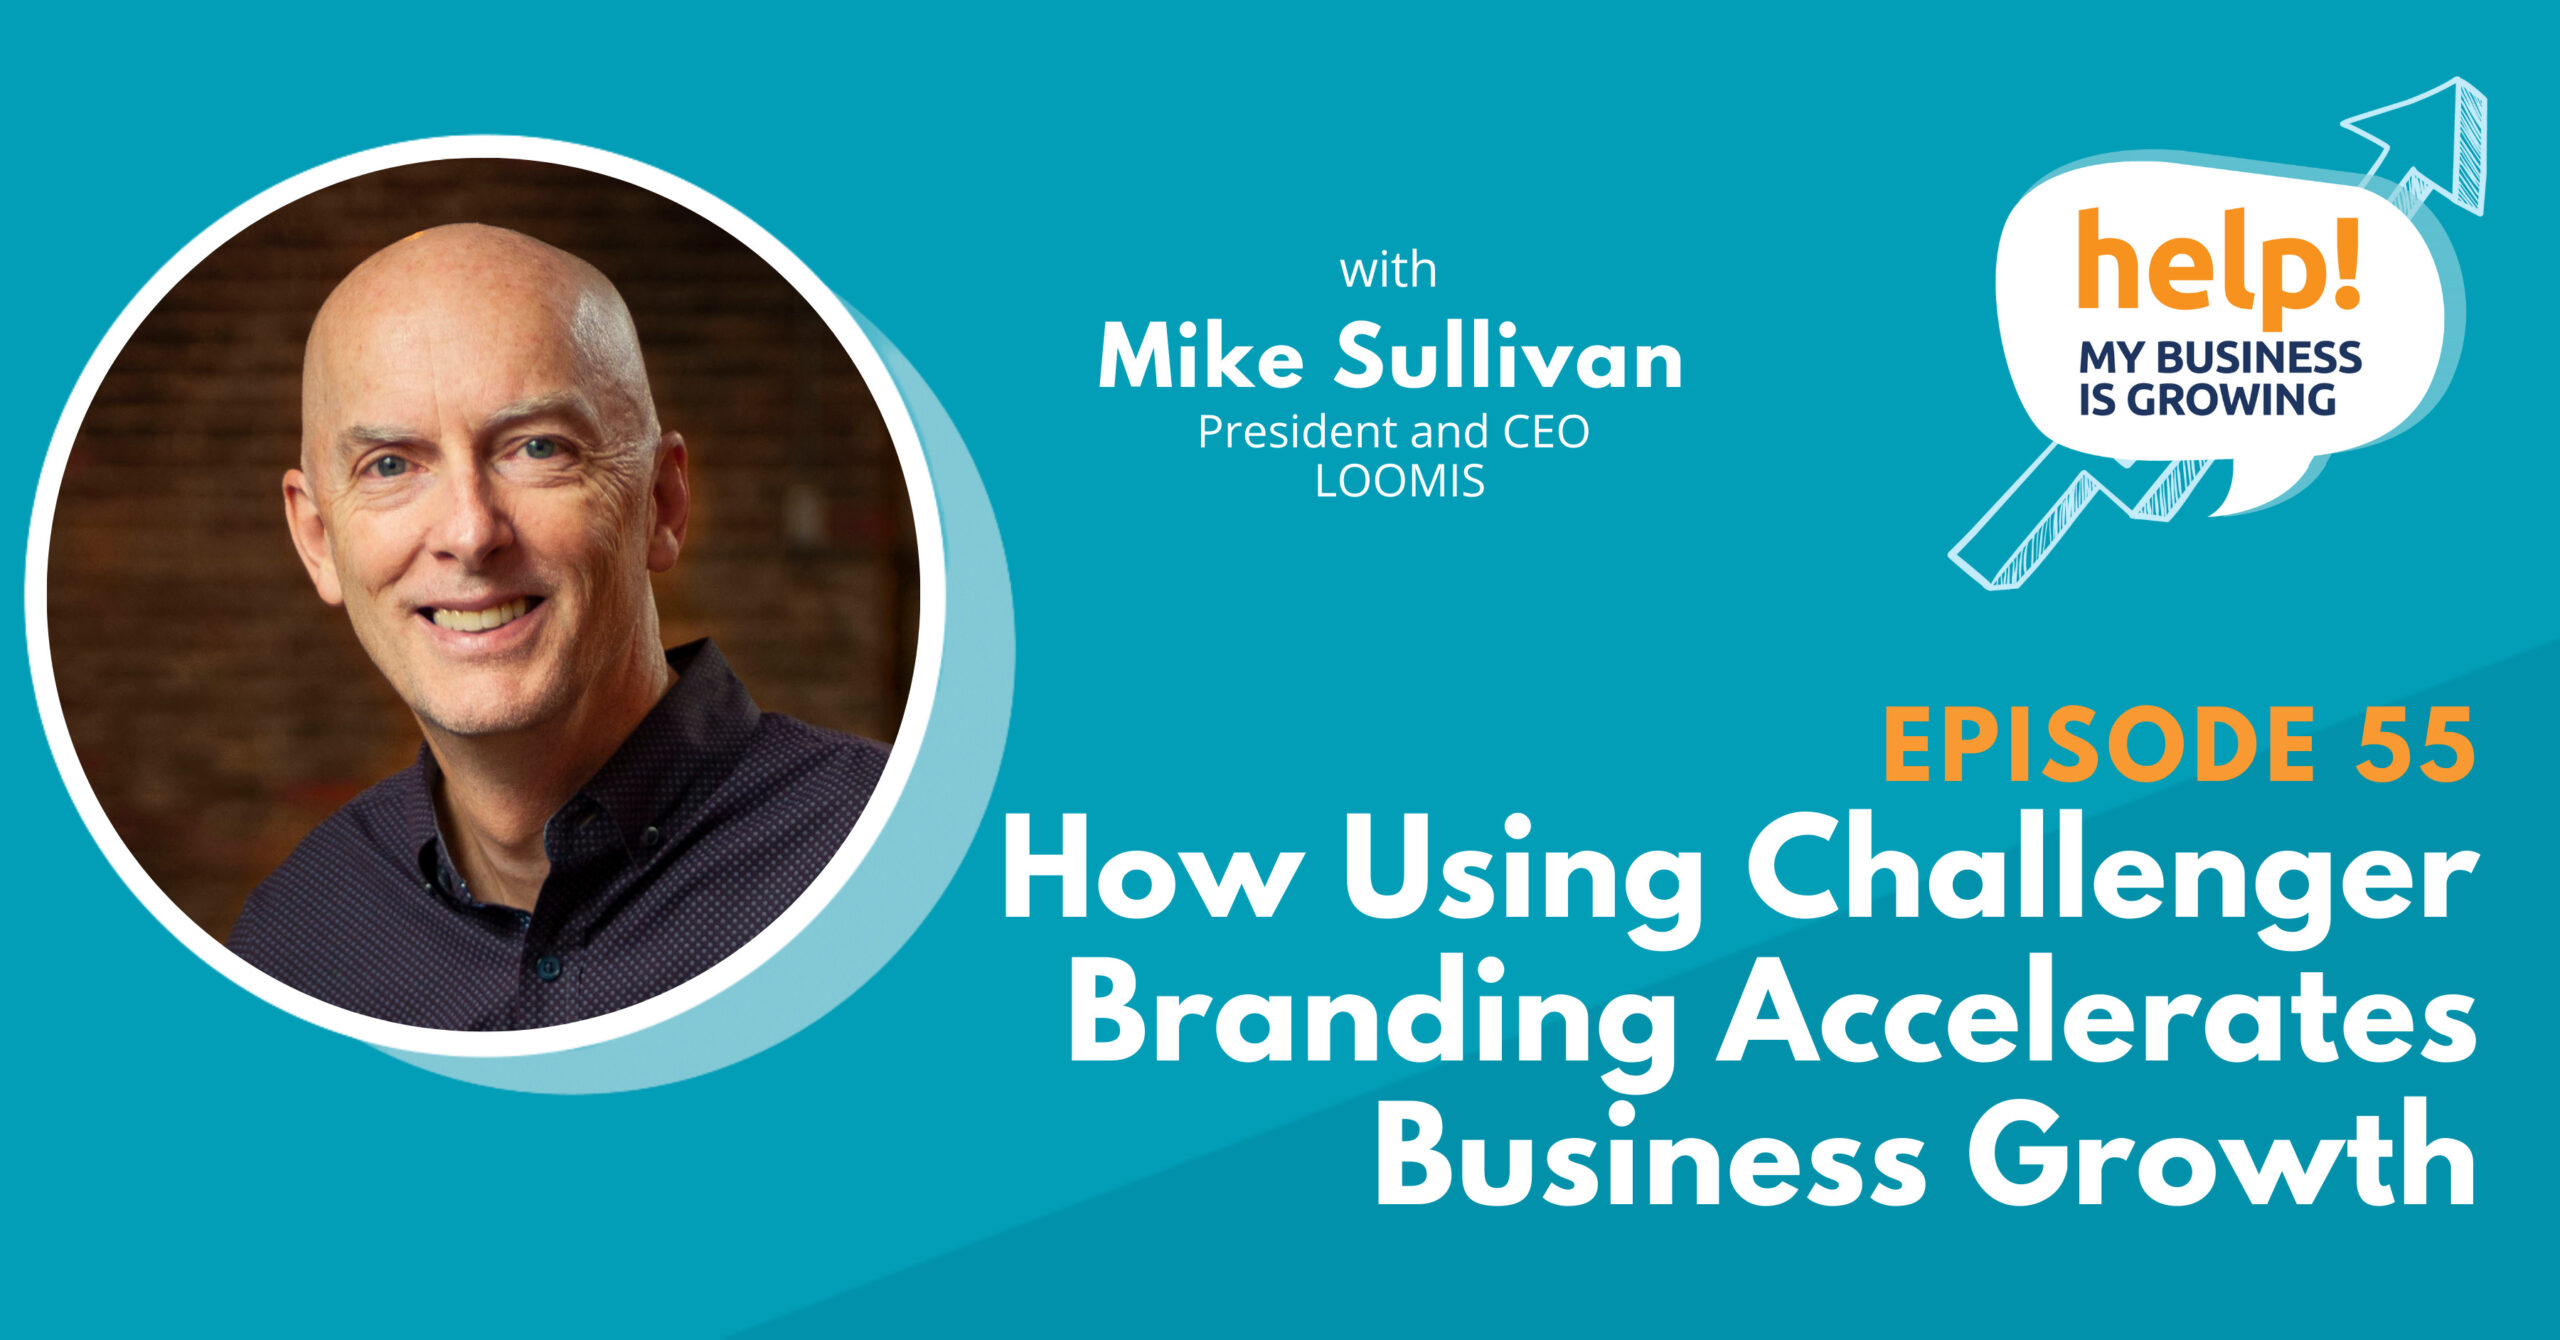 How Using Challenger Branding Accelerates Business Growth